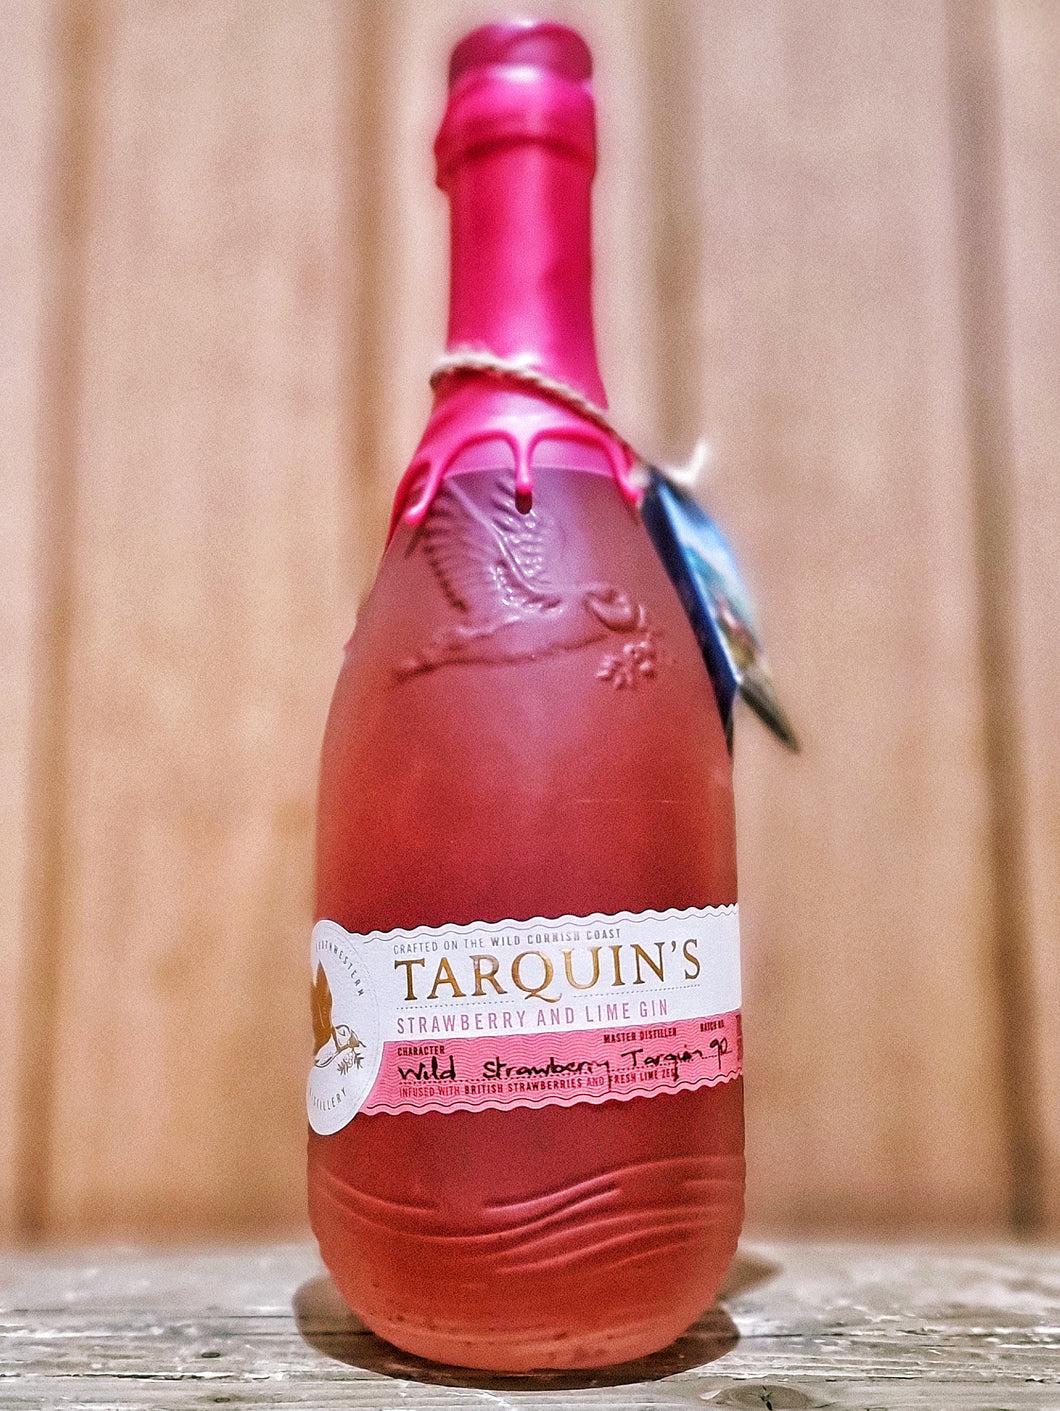 Tarquins - Strawberry and Lime